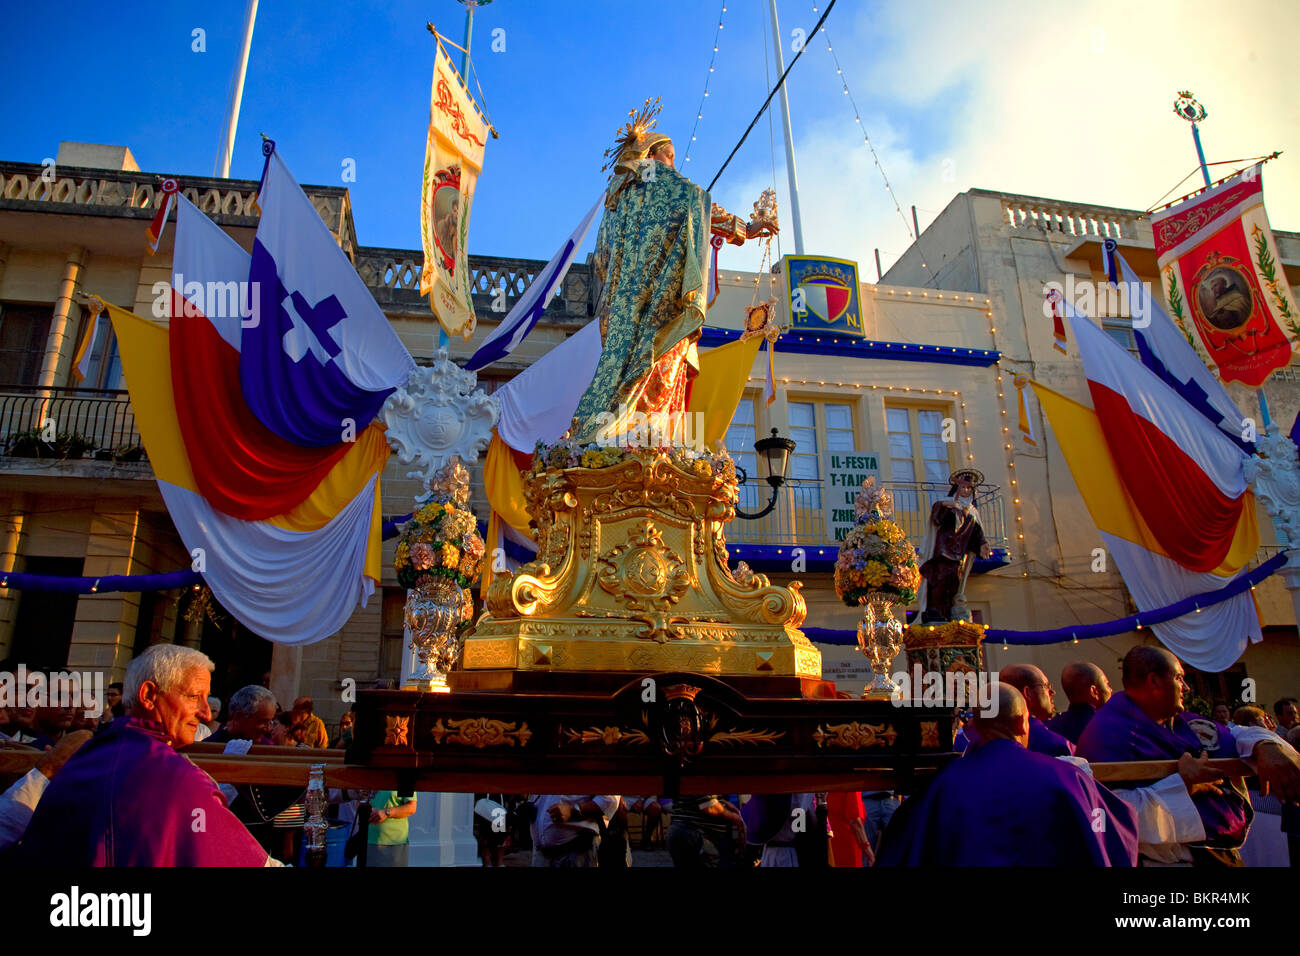 Malta, Zurrieq; The statue of the patron saint, Madonna is carried during the annual religious parade. Stock Photo